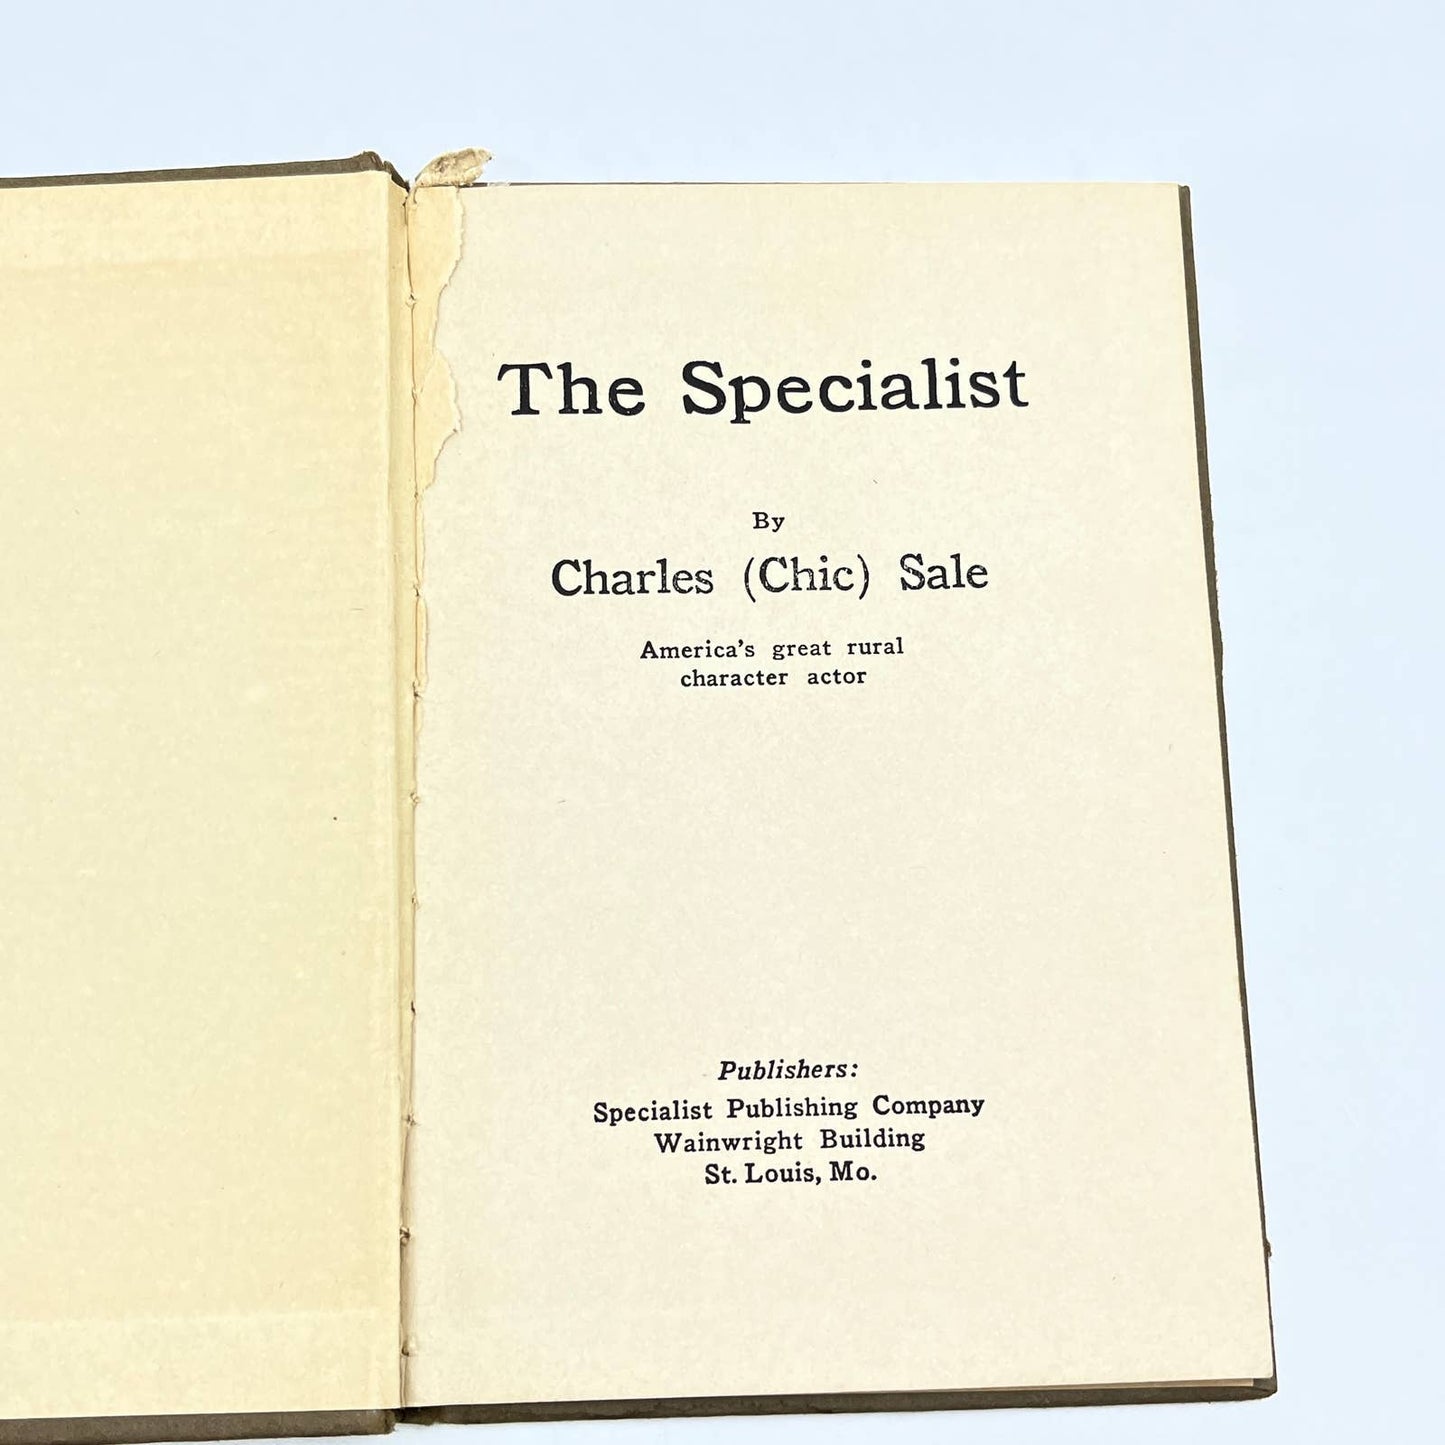 1929 "THE SPECIALIST" By Charles (Chic) Sale Early Humor Book Hardcover TG2